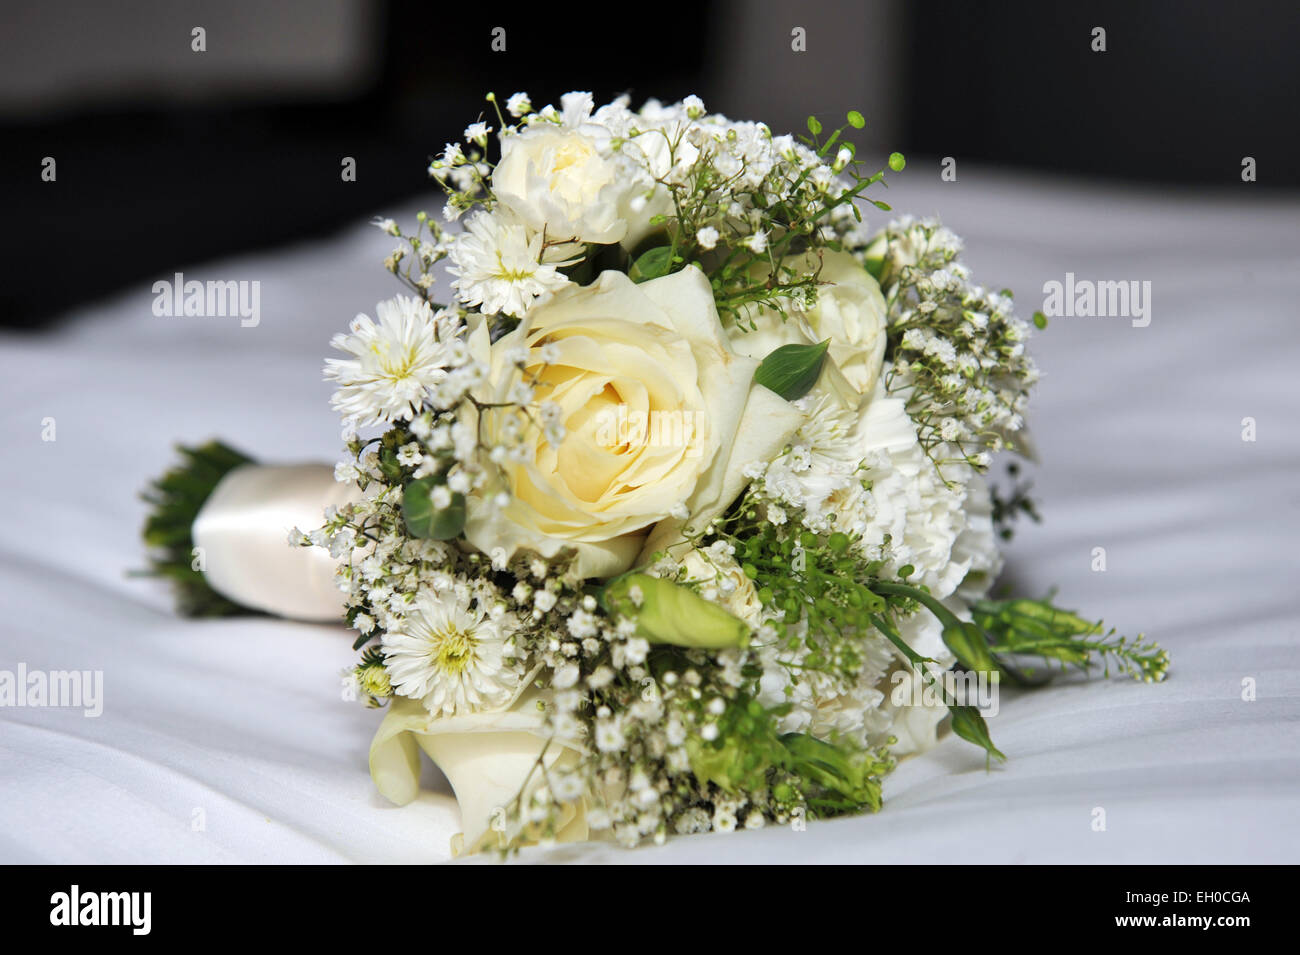 Traditional wedding flower bouquet Stock Photo